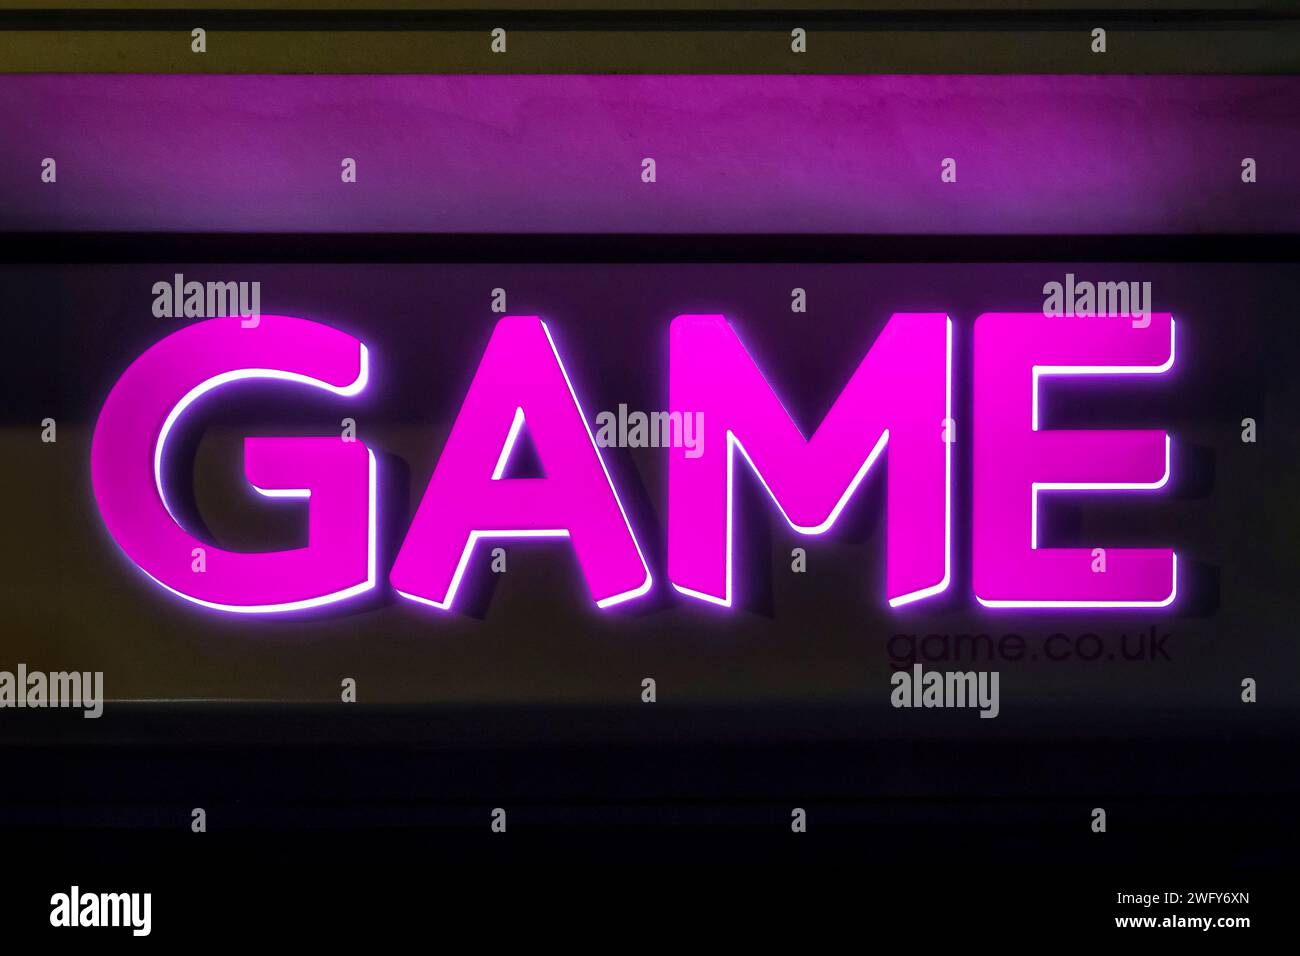 Game Video Game Shop Illuminated Store Shop Sign Stock Photo